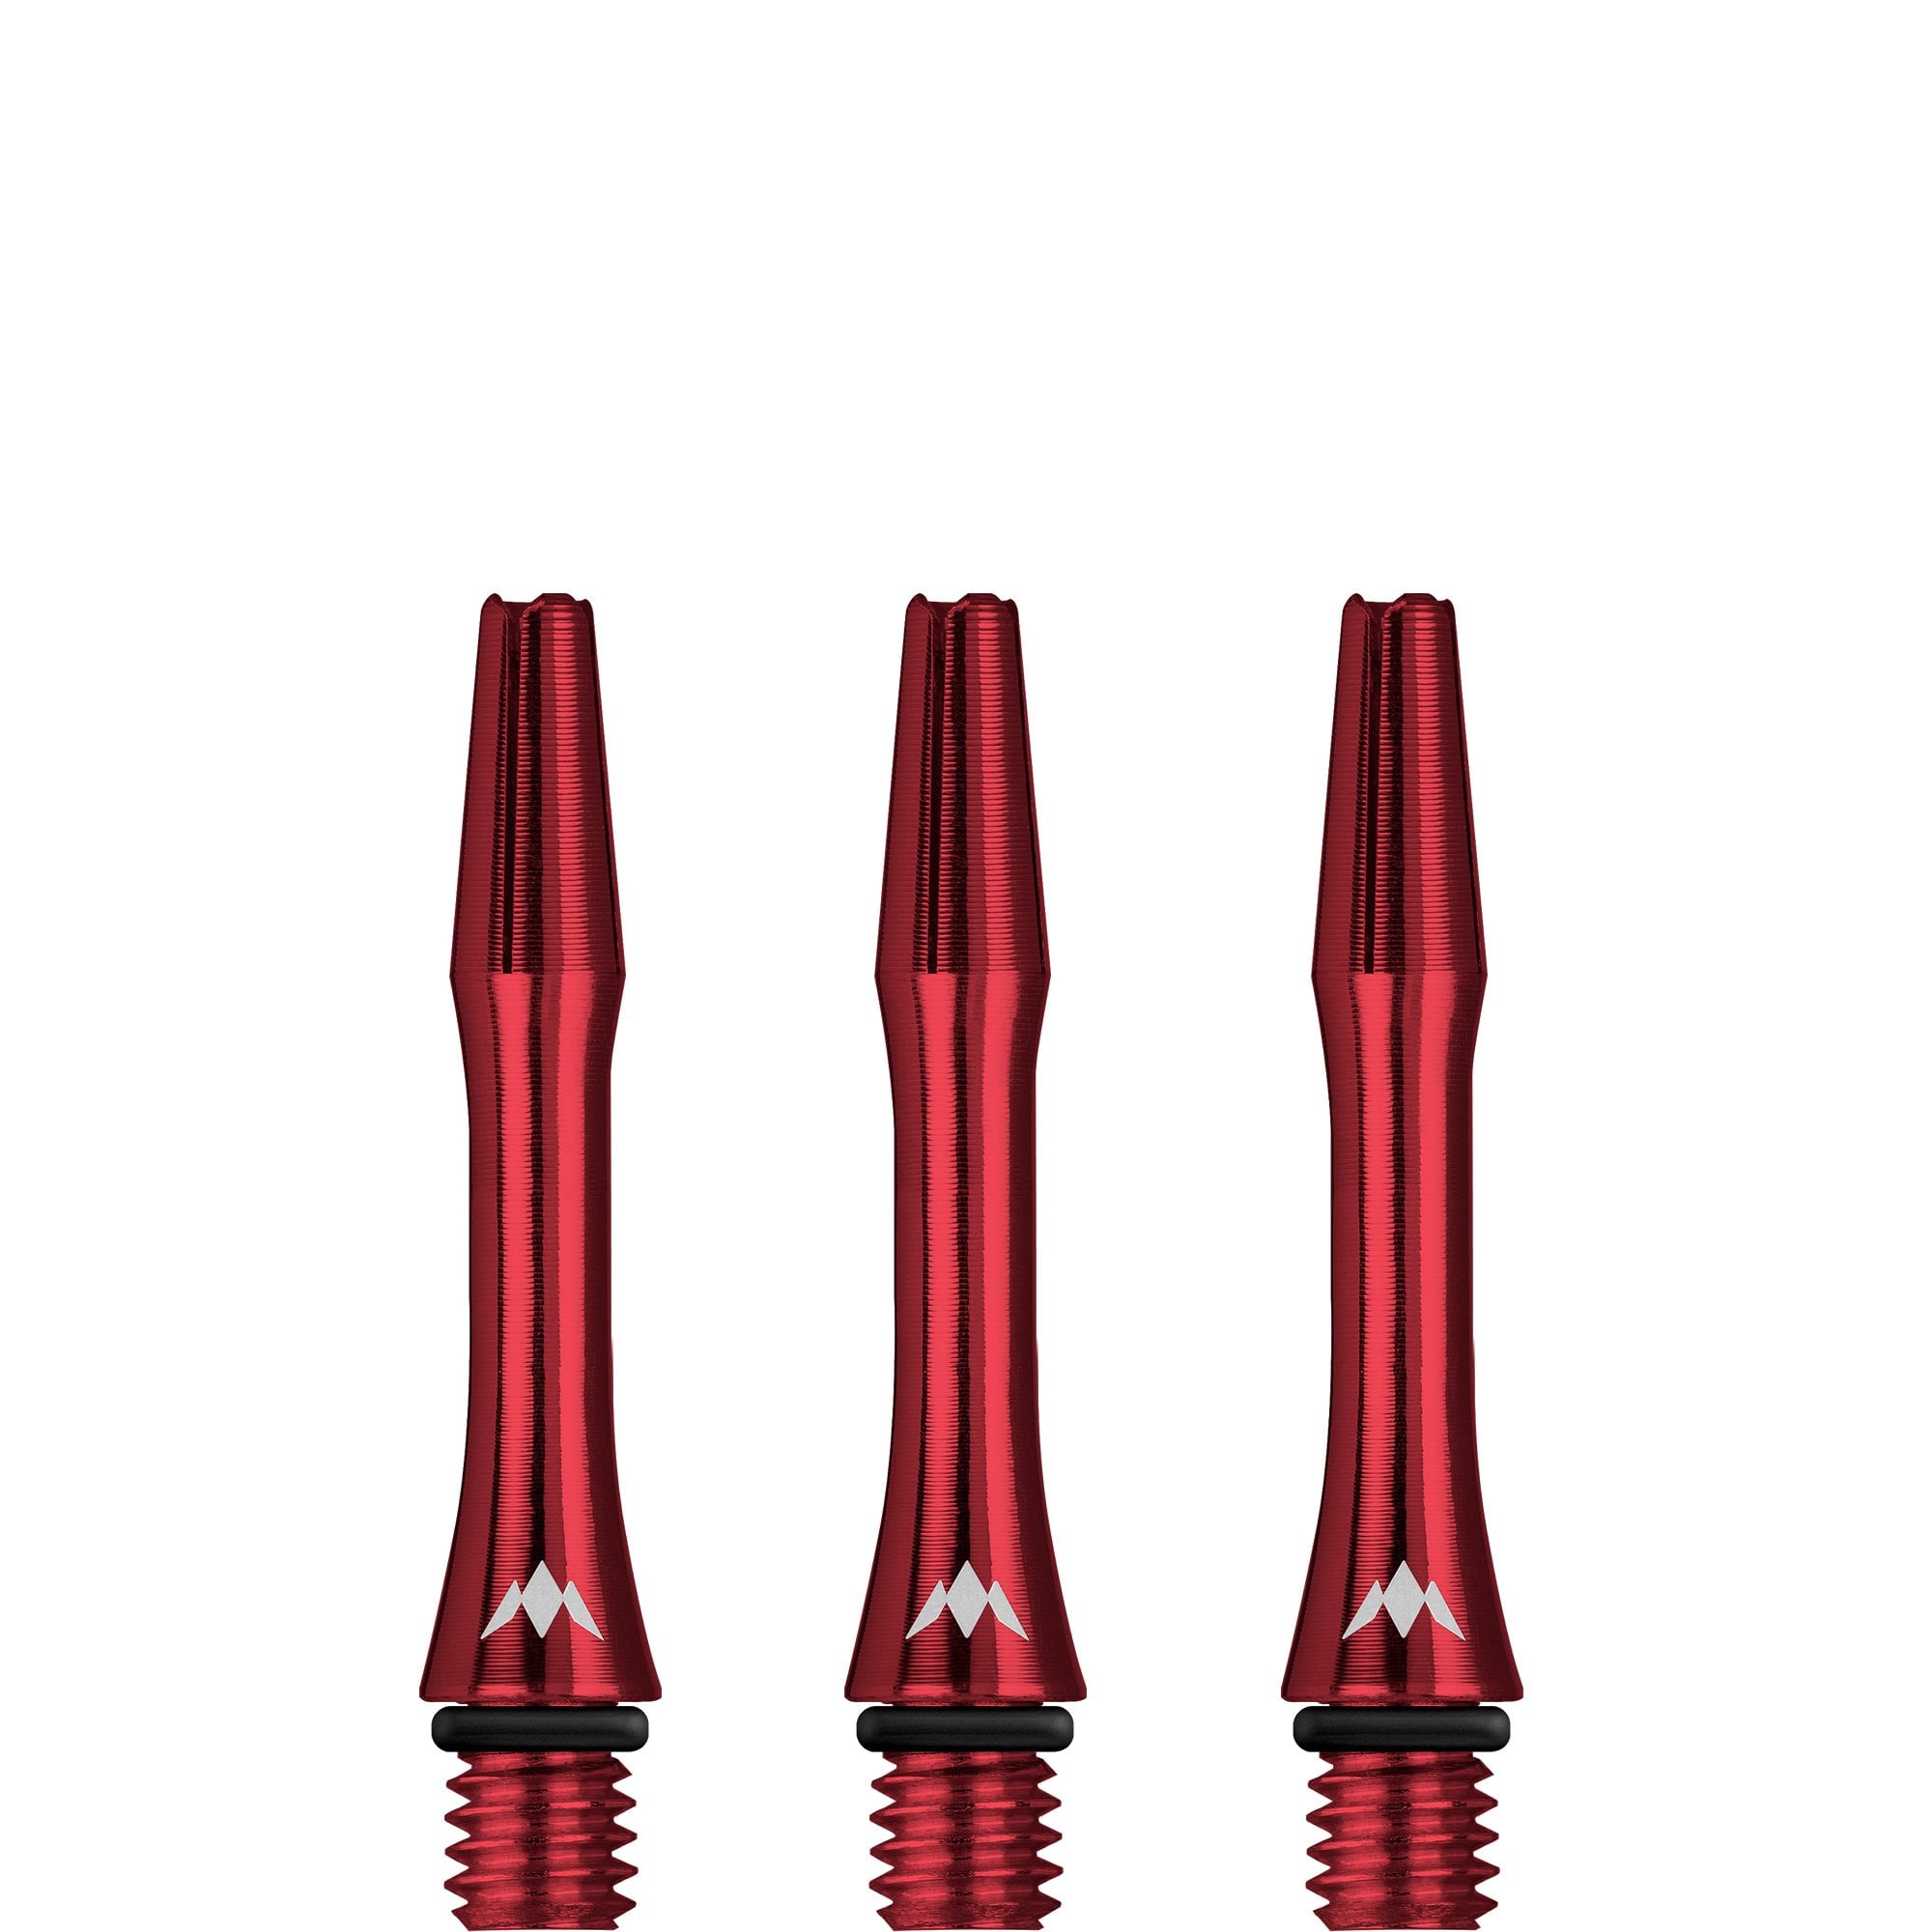 Mission Alicross Stems (in Nylon Shaft Sizes) - Red